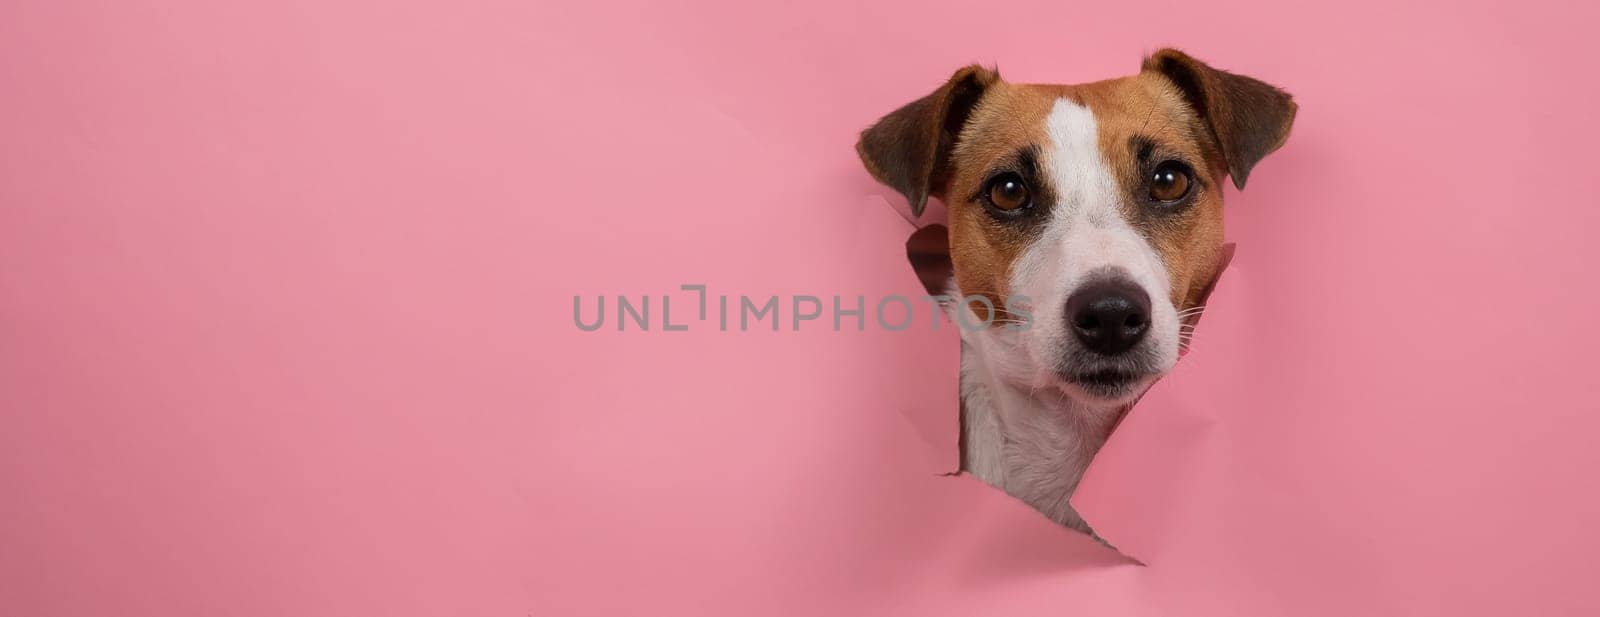 Funny dog jack russell terrier tore pink paper background. Widescreen. by mrwed54